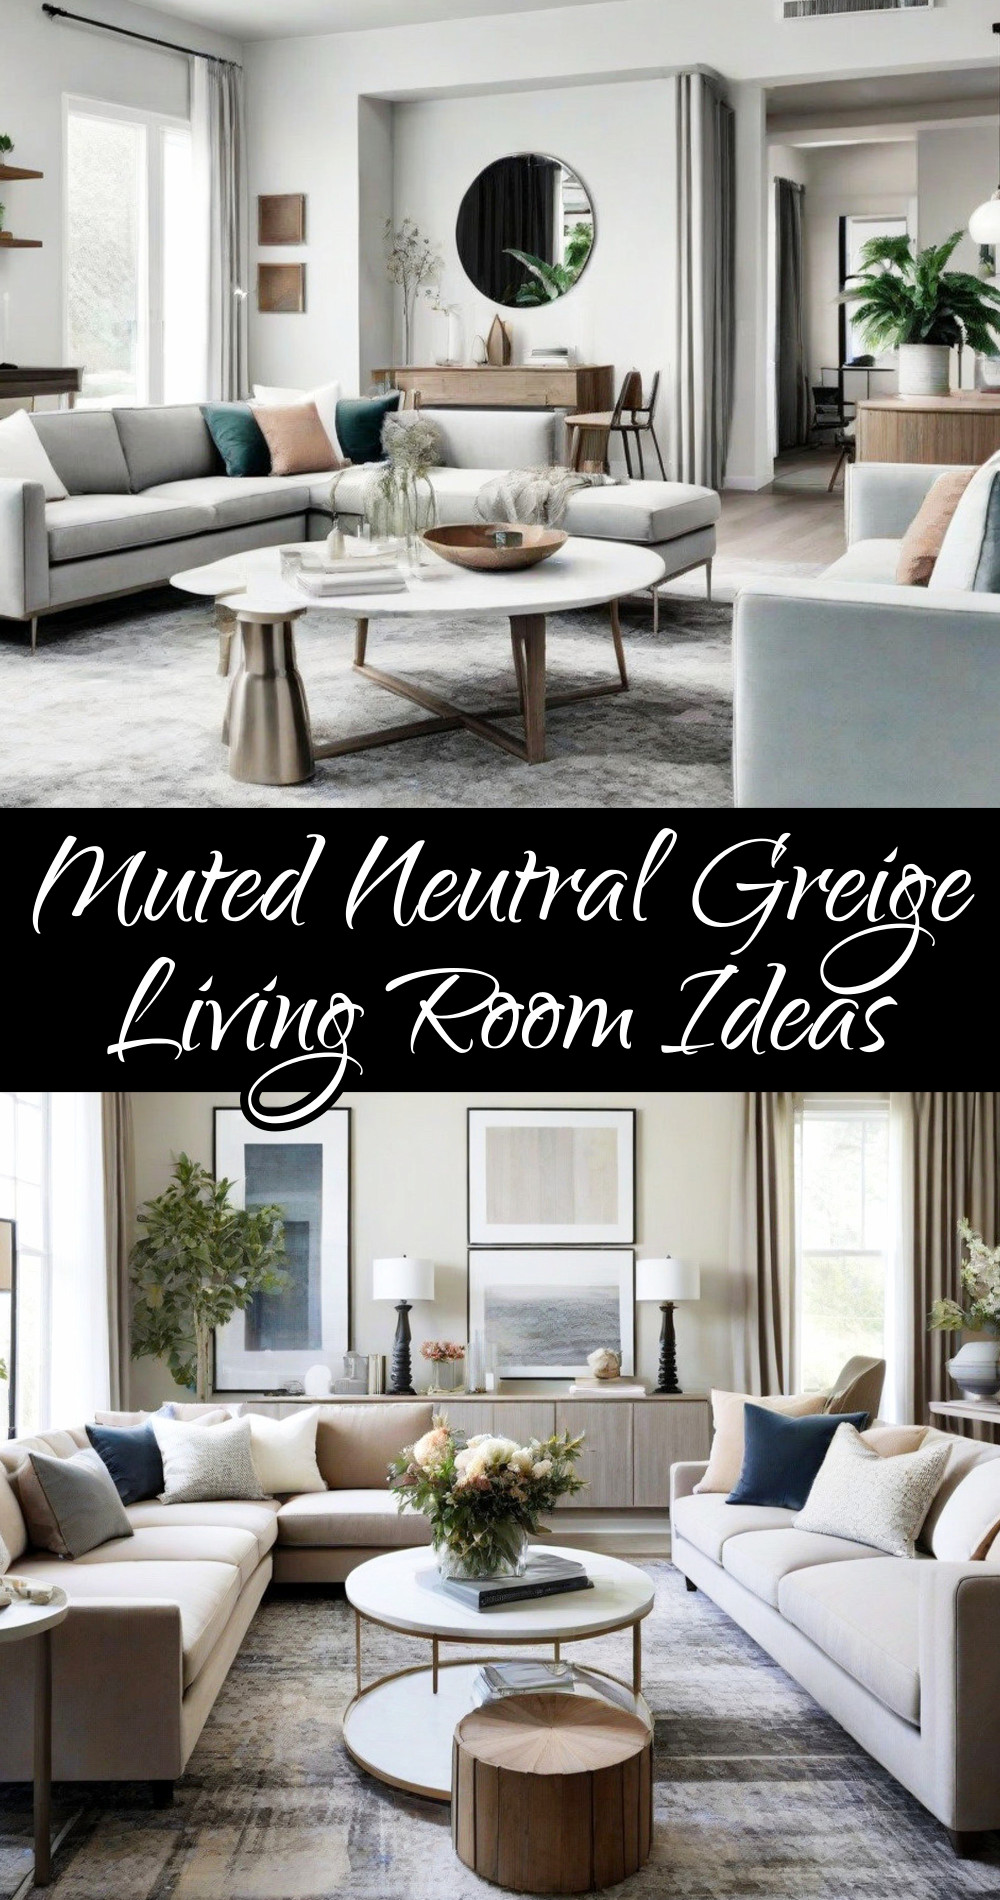 muted neutral greige living room ideas